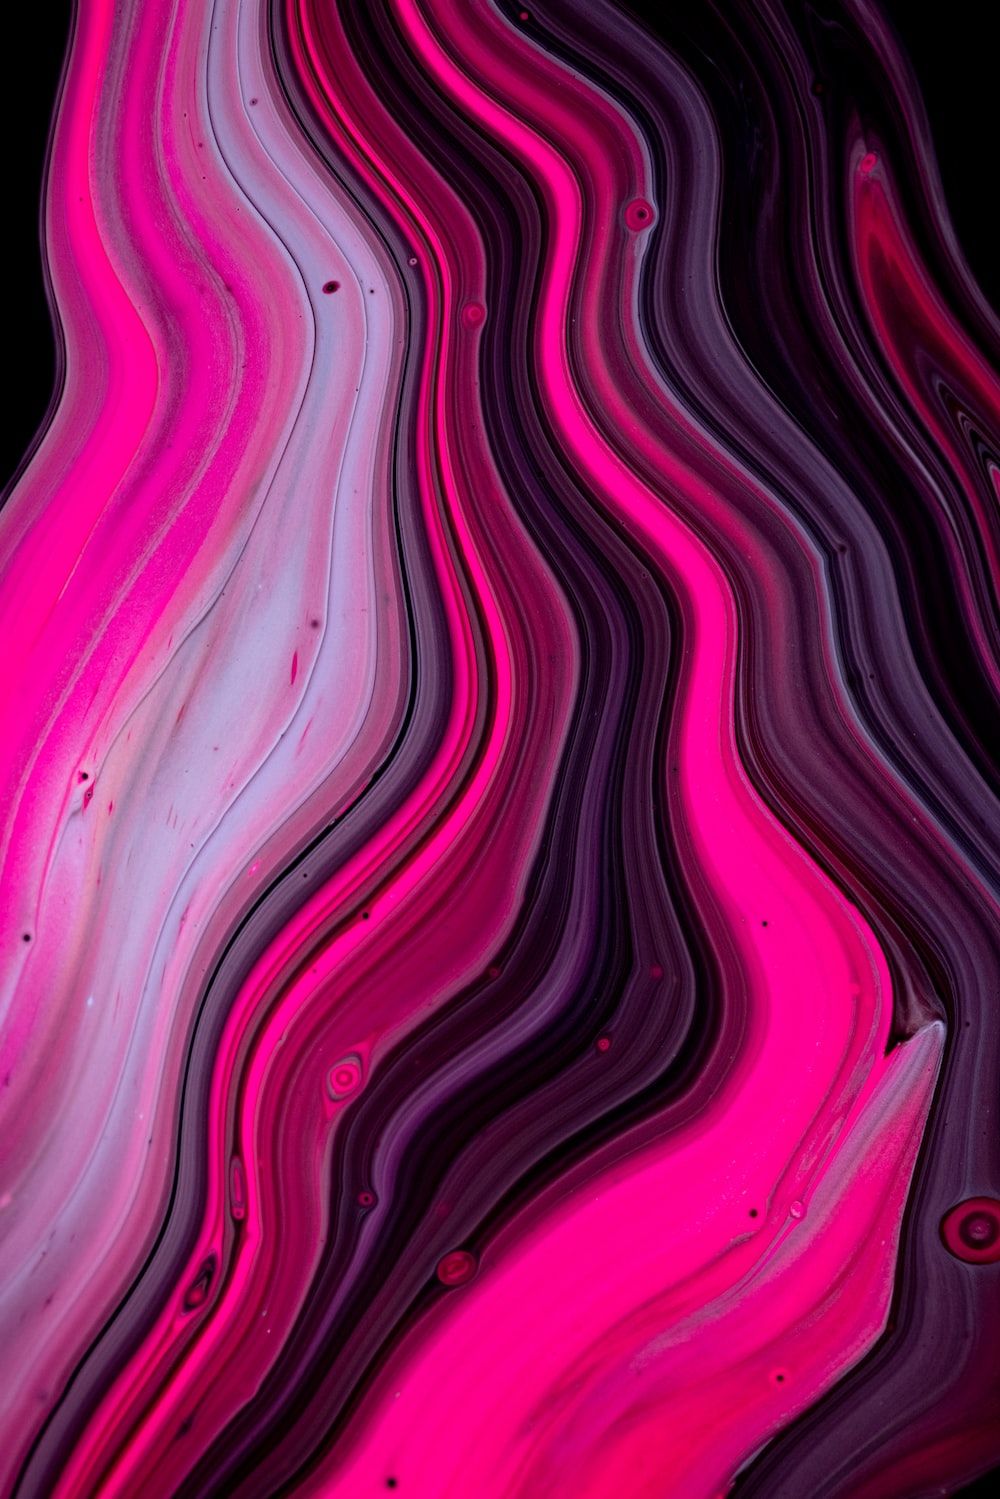 A pink and black abstract design - Magenta